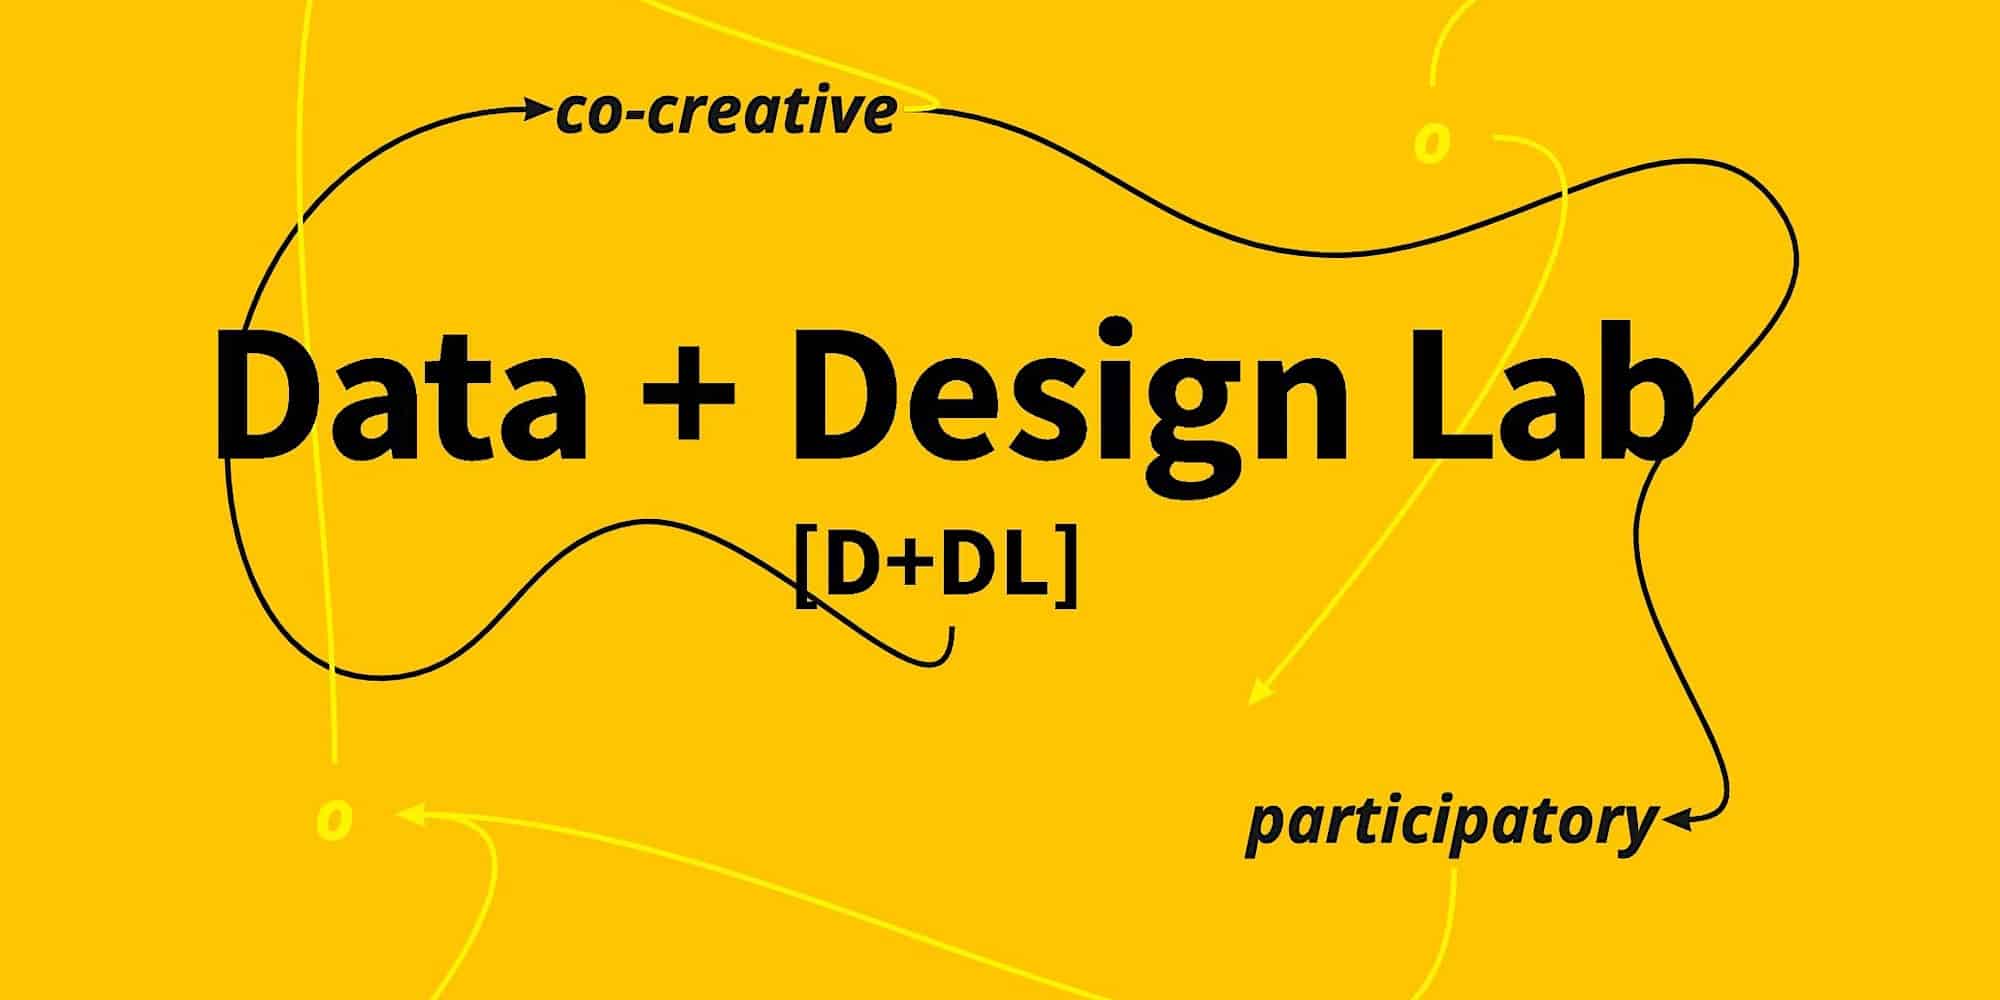 Text reads: Data + Design Lab. With curved arrows pointing to 'co-creative' and 'participatory'.